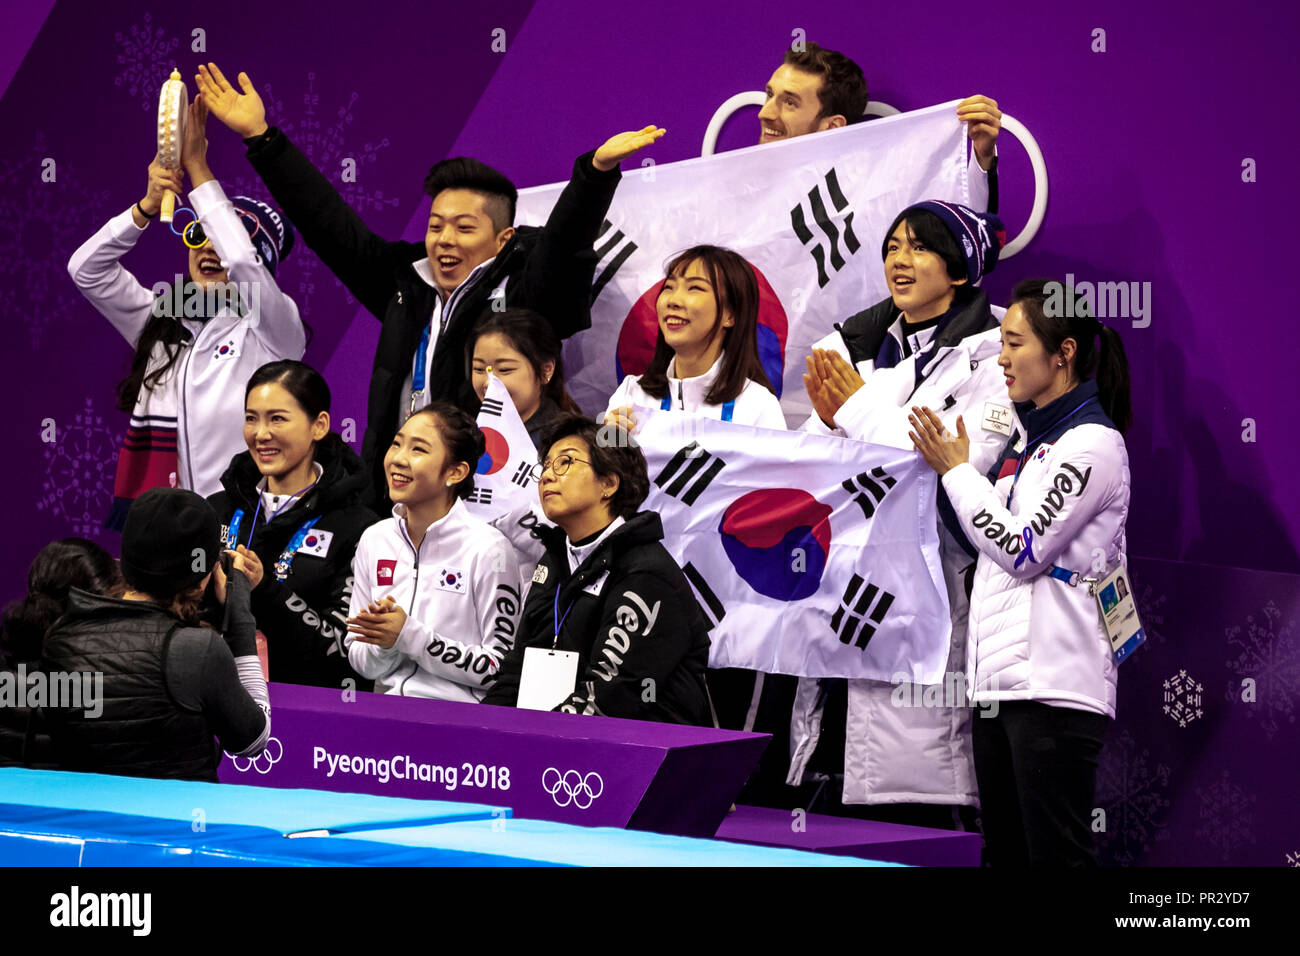 Korean team celebrating during the Figure Skating Team competition at the Olympic Winter Games PyeongChang 2018 Stock Photo